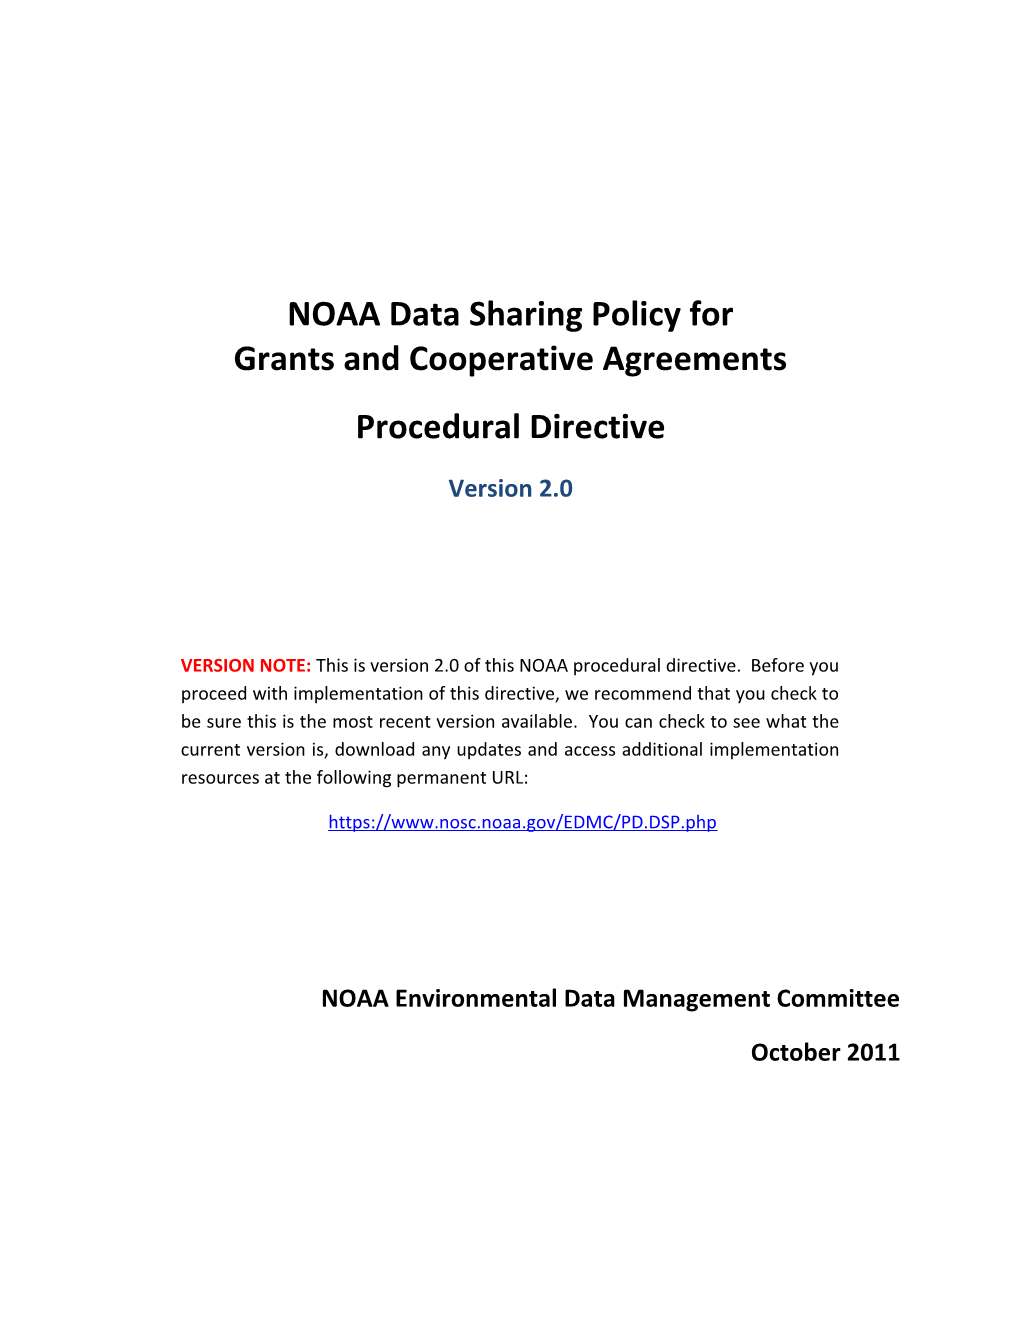 NOAA Data Sharing Policy For